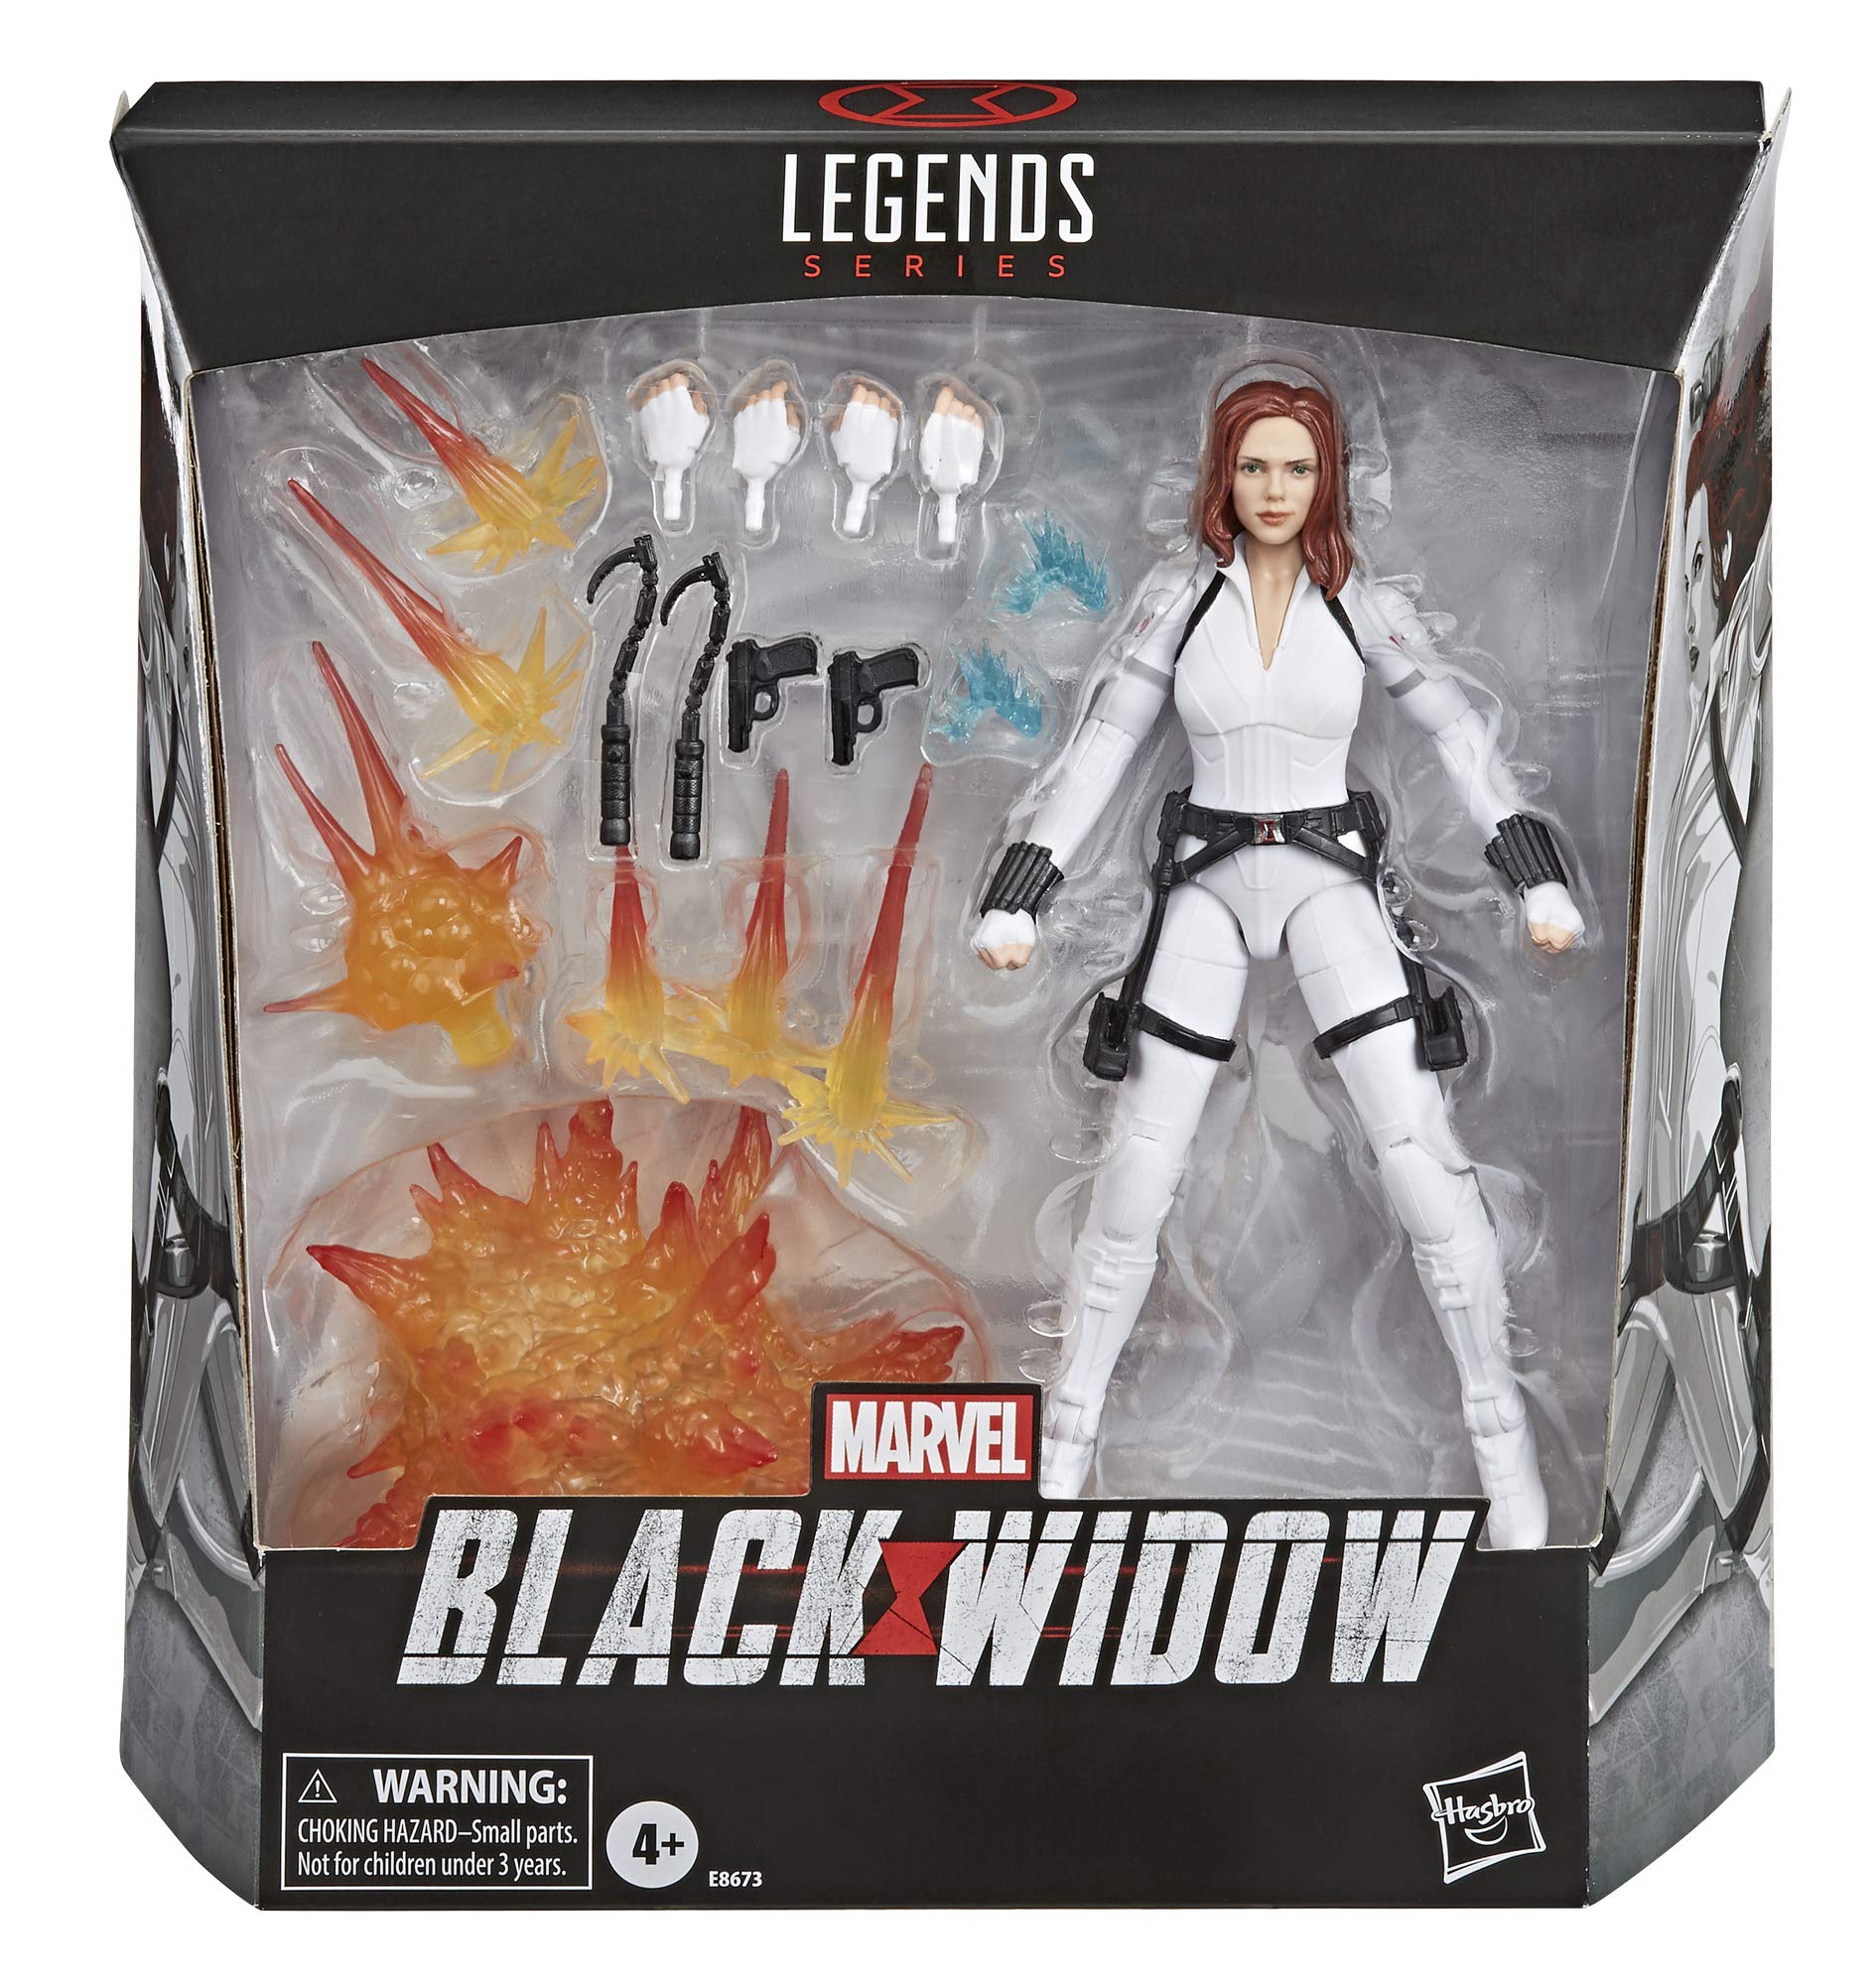 Marvel Hasbro Legends Series 6-Inch Collectible Black Widow Action Figure Toy, Includes 12 Accessories, Ages 4 and Up